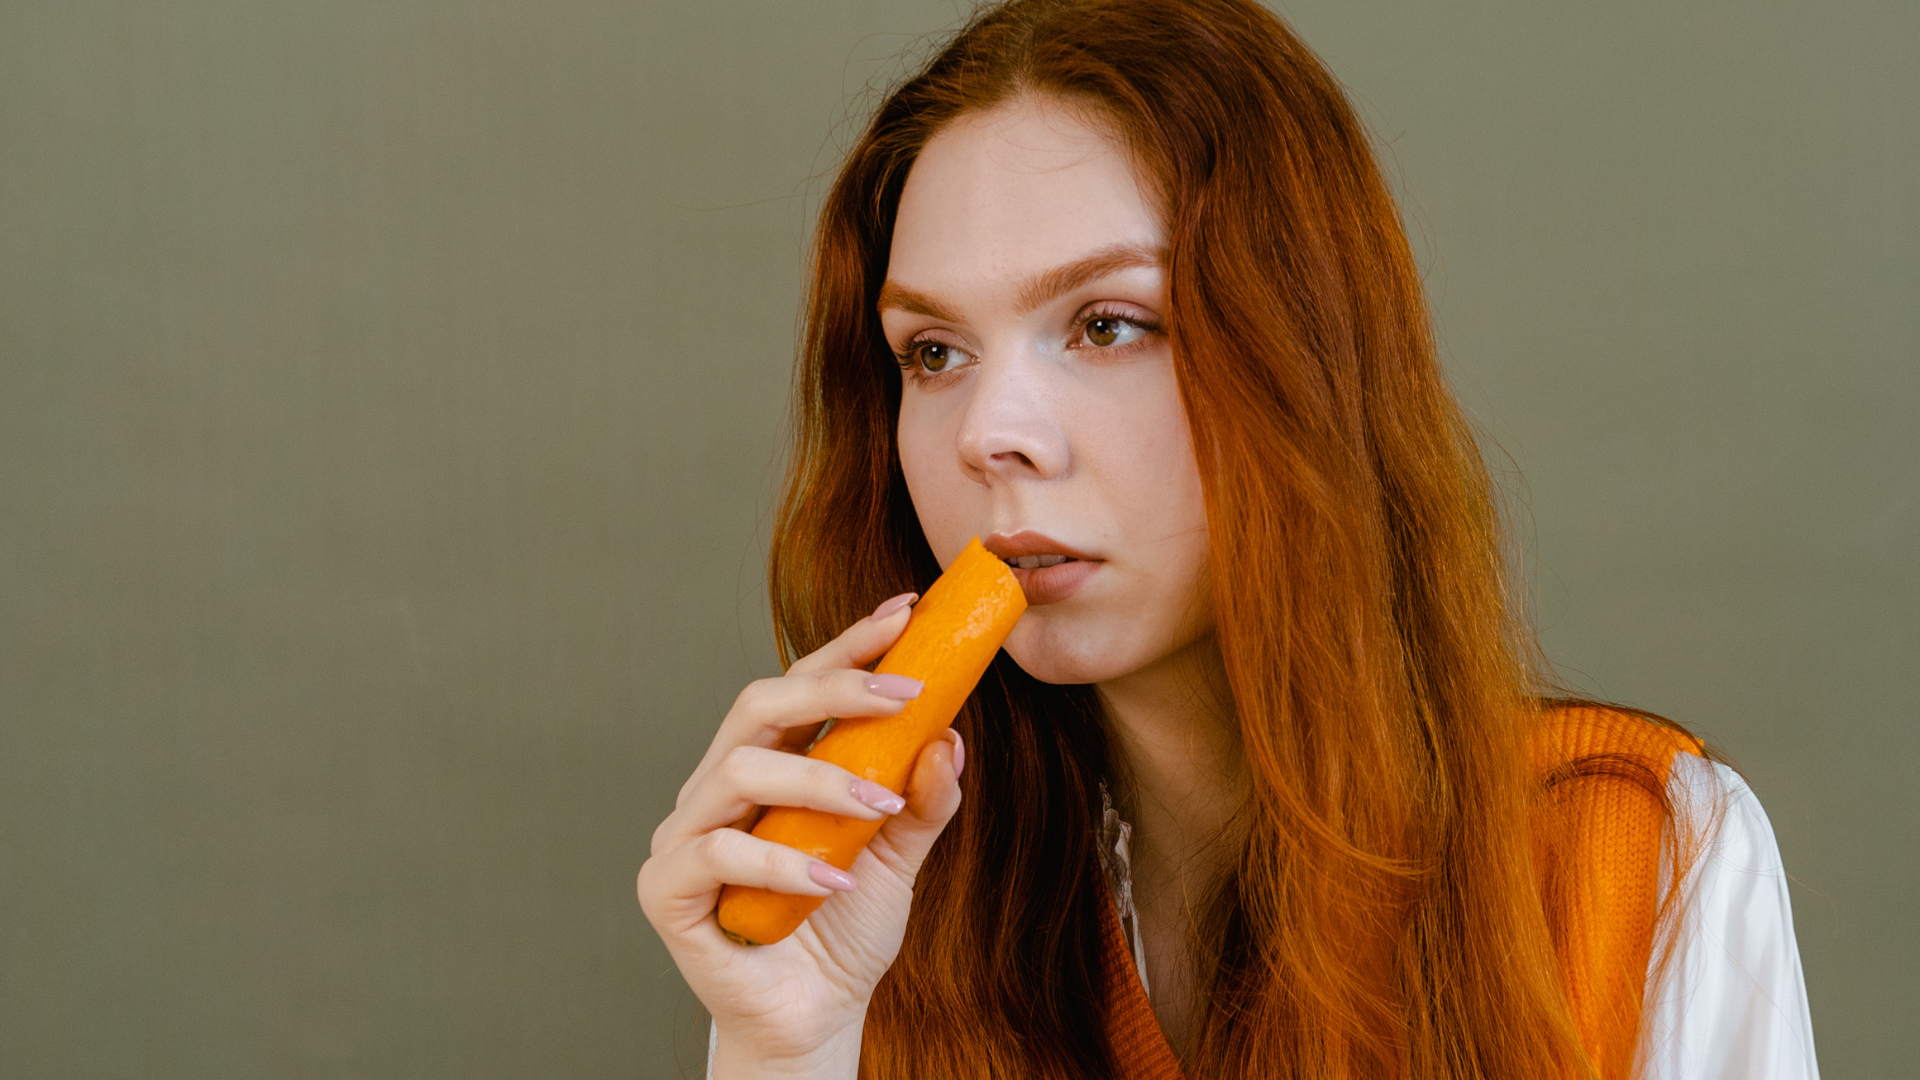 “Carrot Tans” Are Trending on TikTok: Could This Be The Miracle “Tan” for Redheads?